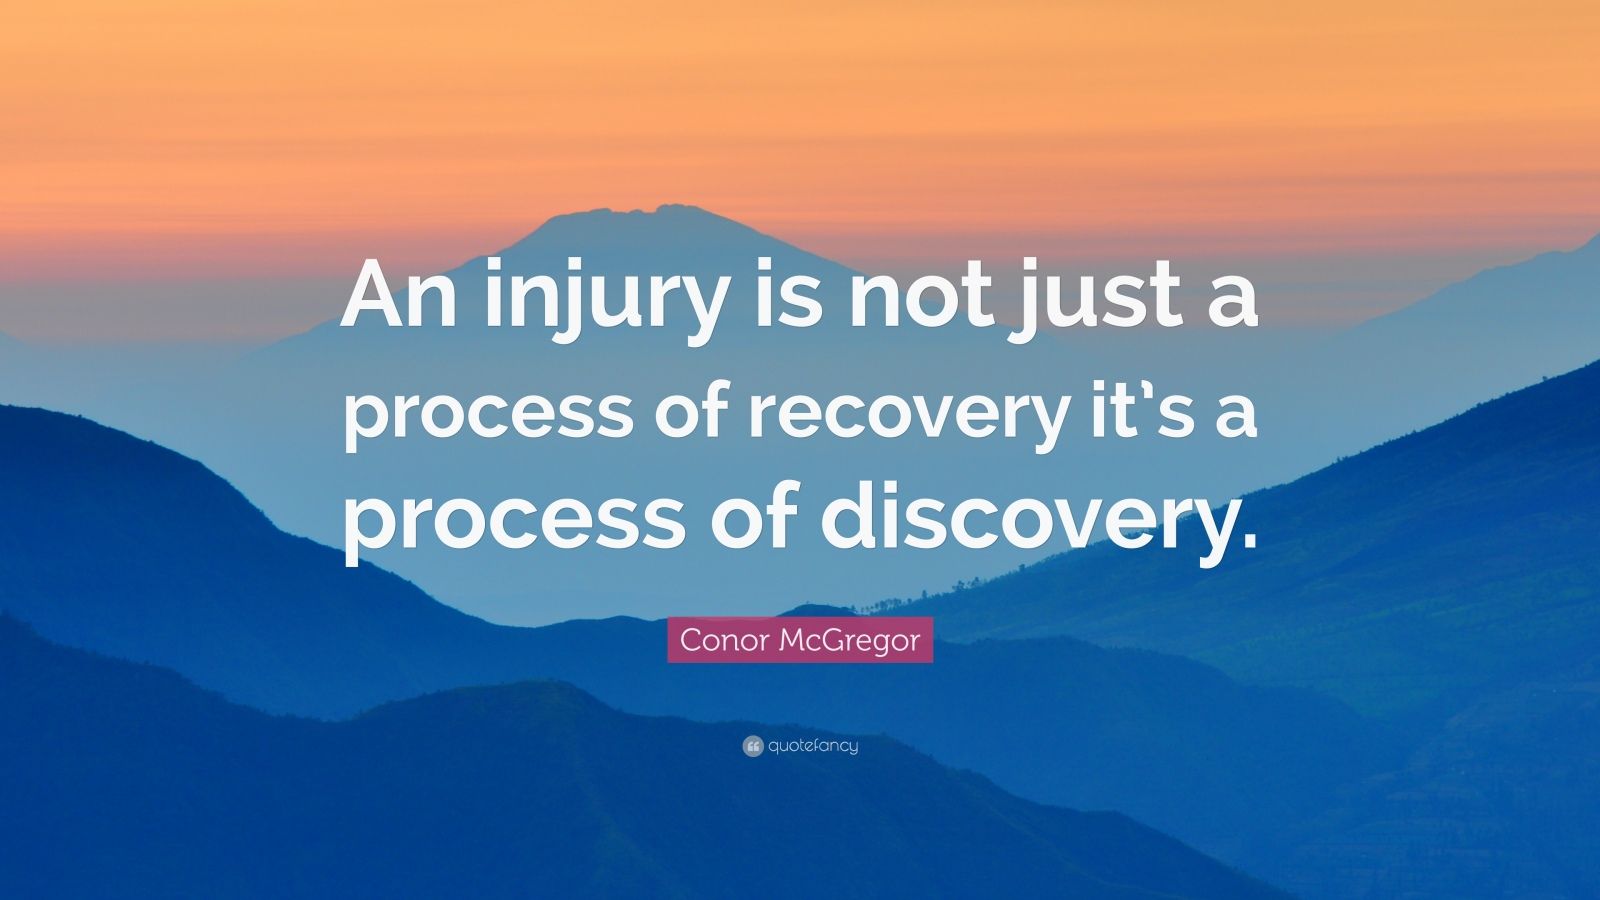 Conor McGregor Quote: “An injury is not just a process of recovery it’s